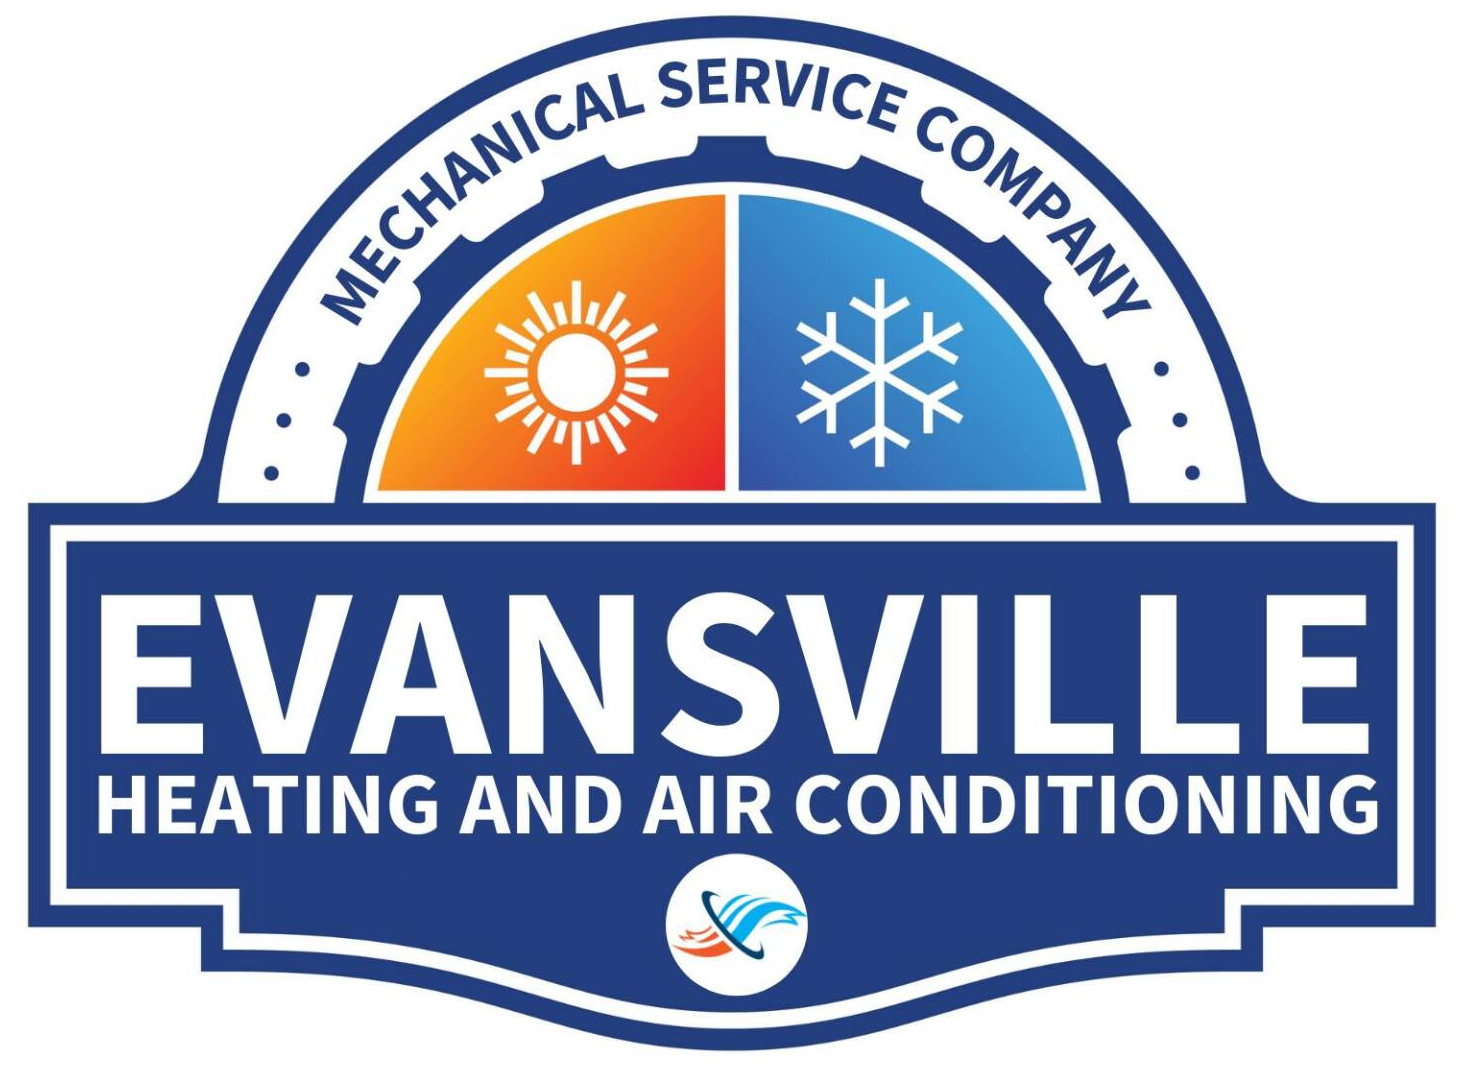 Evansville Heating and Air Conditioning